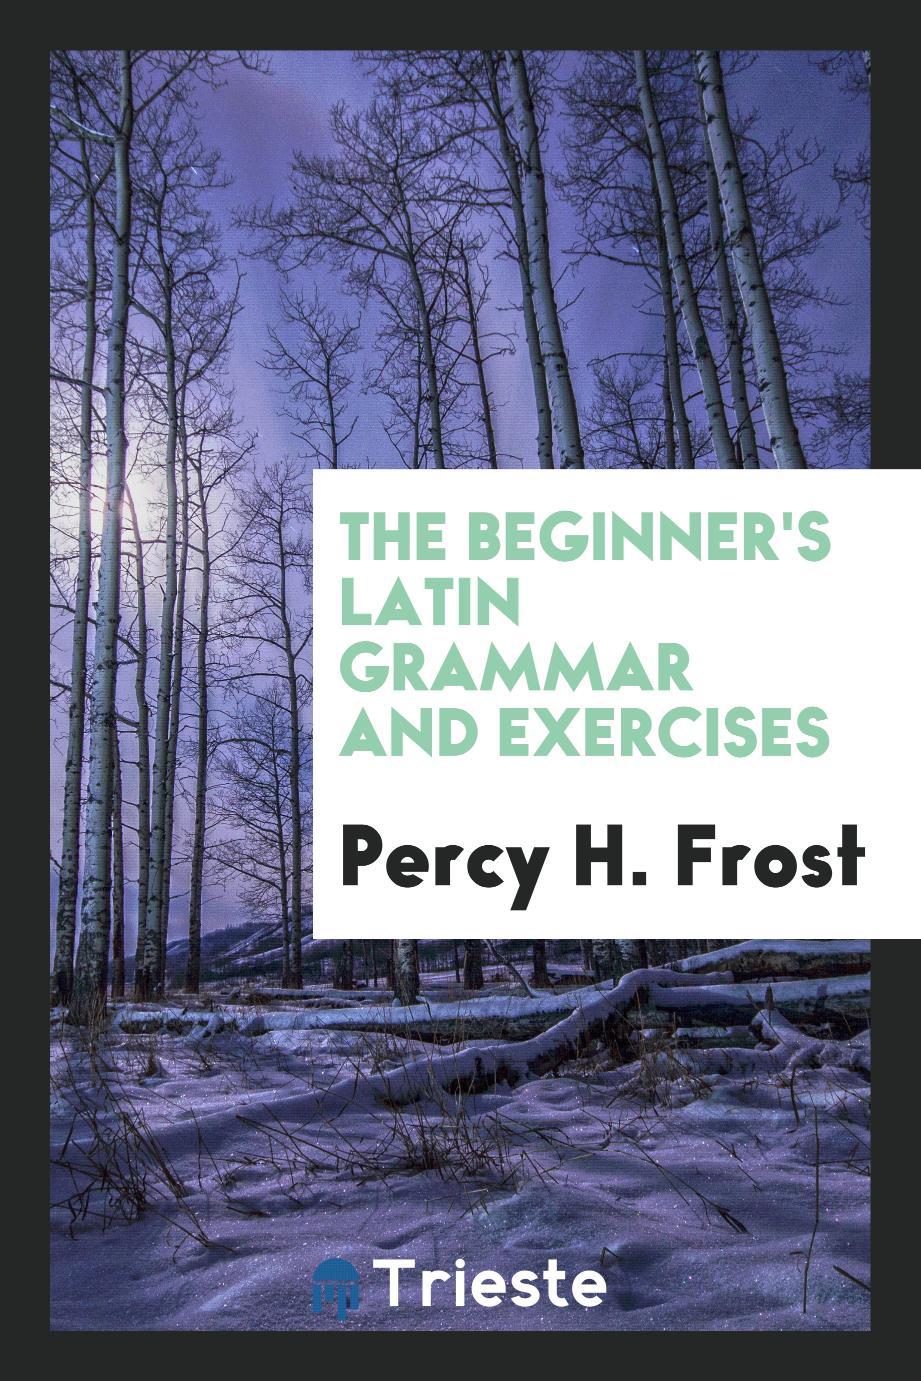 The Beginner's Latin Grammar and Exercises